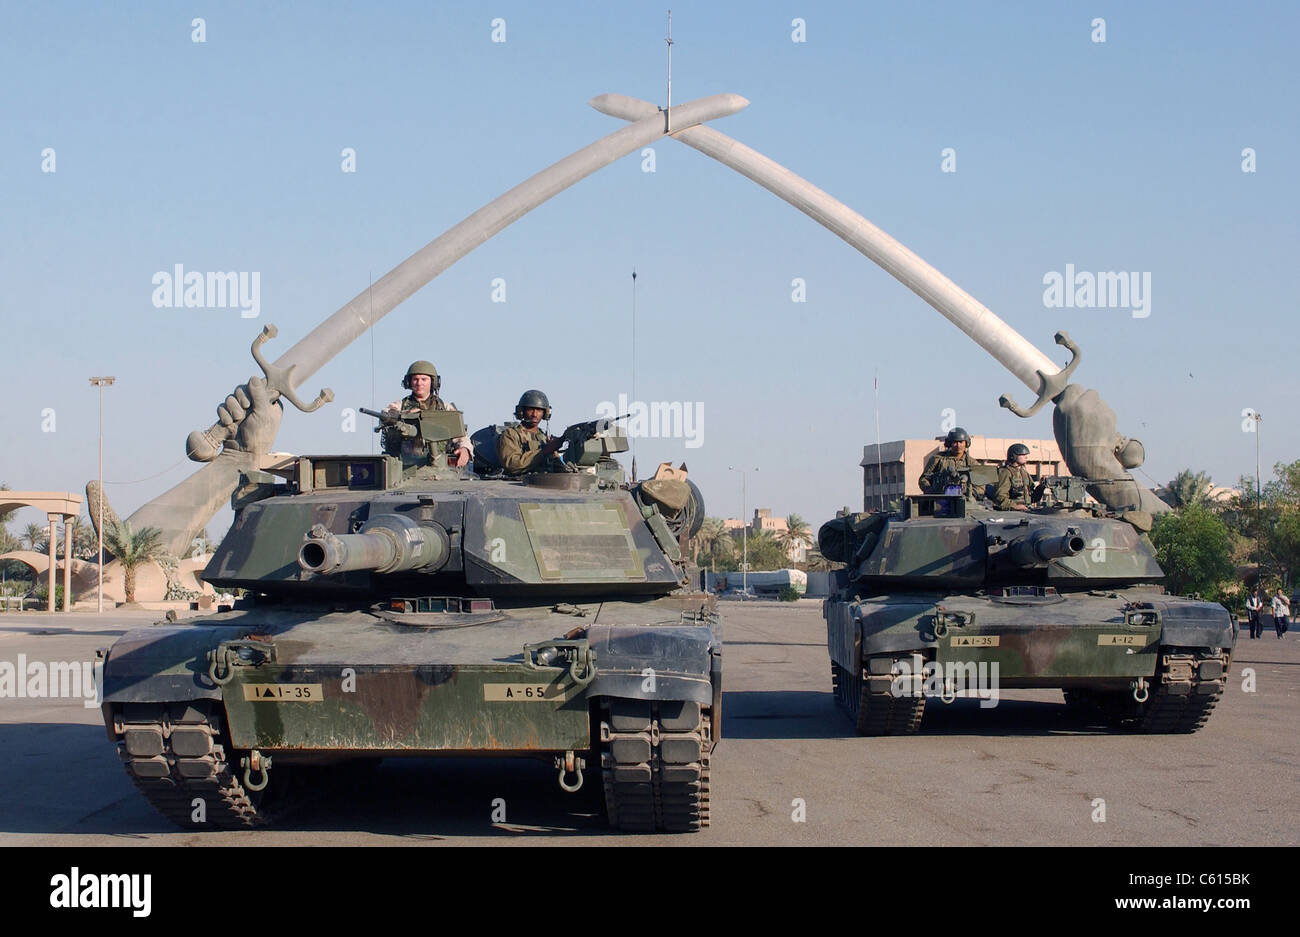 Soldiers in an Army Abrams Tank pose for a photo under the 'Hands of Victory' in Ceremony Square Baghdad Iraq. The monument commemorating the Iran-Iraq war 1980-88 is modeled after Saddam Hussein's arms and the swords were fabricated from the melted guns of dead Iraqi soldiers. (BSLOC 2011 12 130) Stock Photo